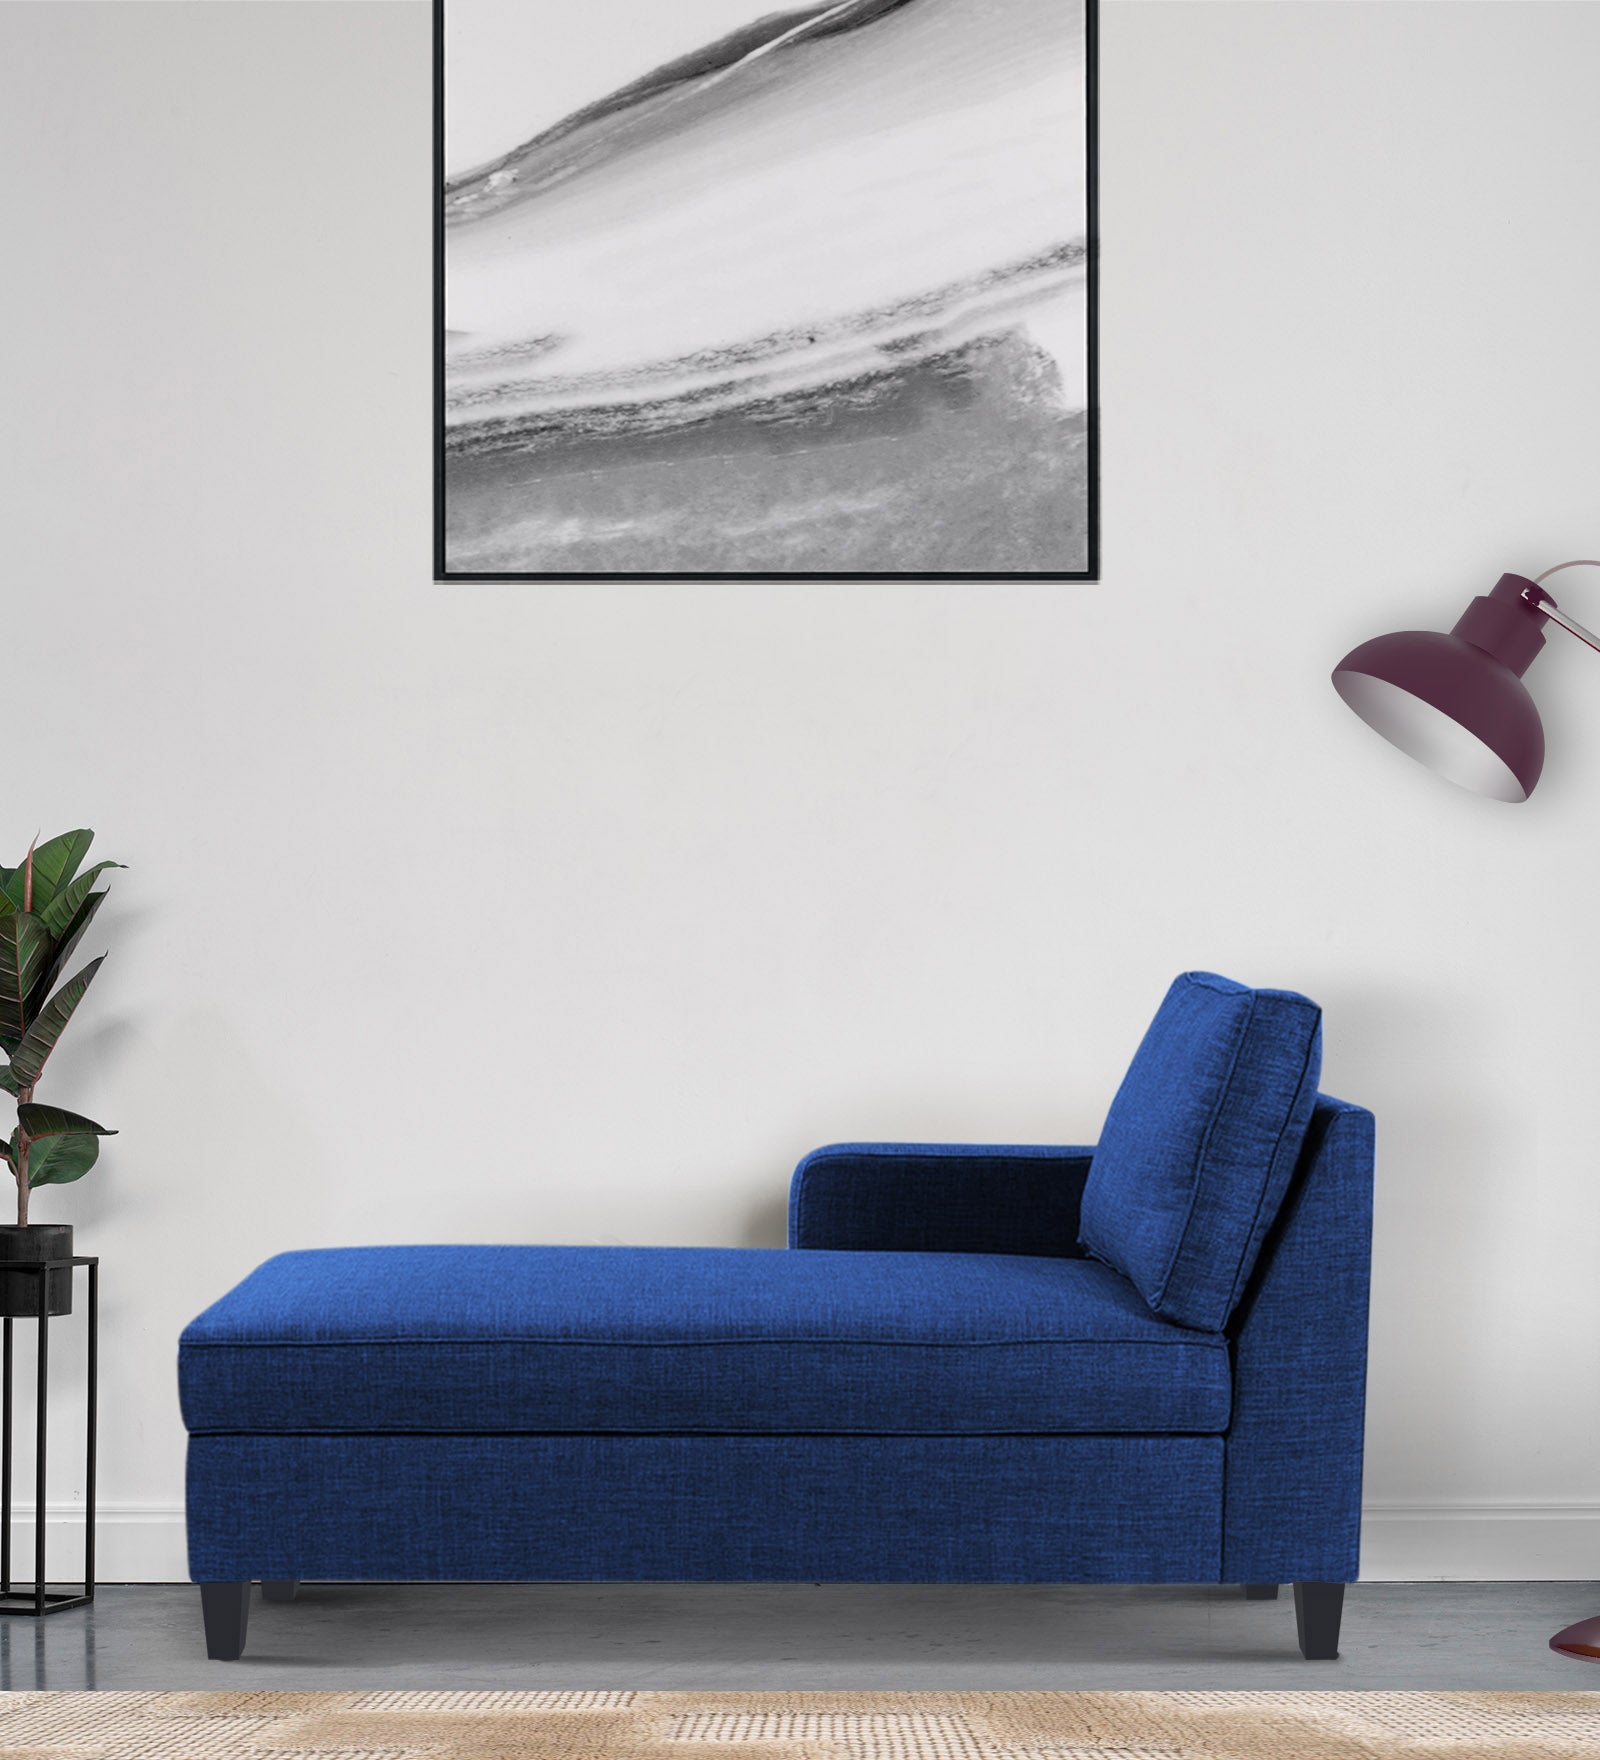 Harry Fabric LHS Chaise Lounger in Royal Blue Colour